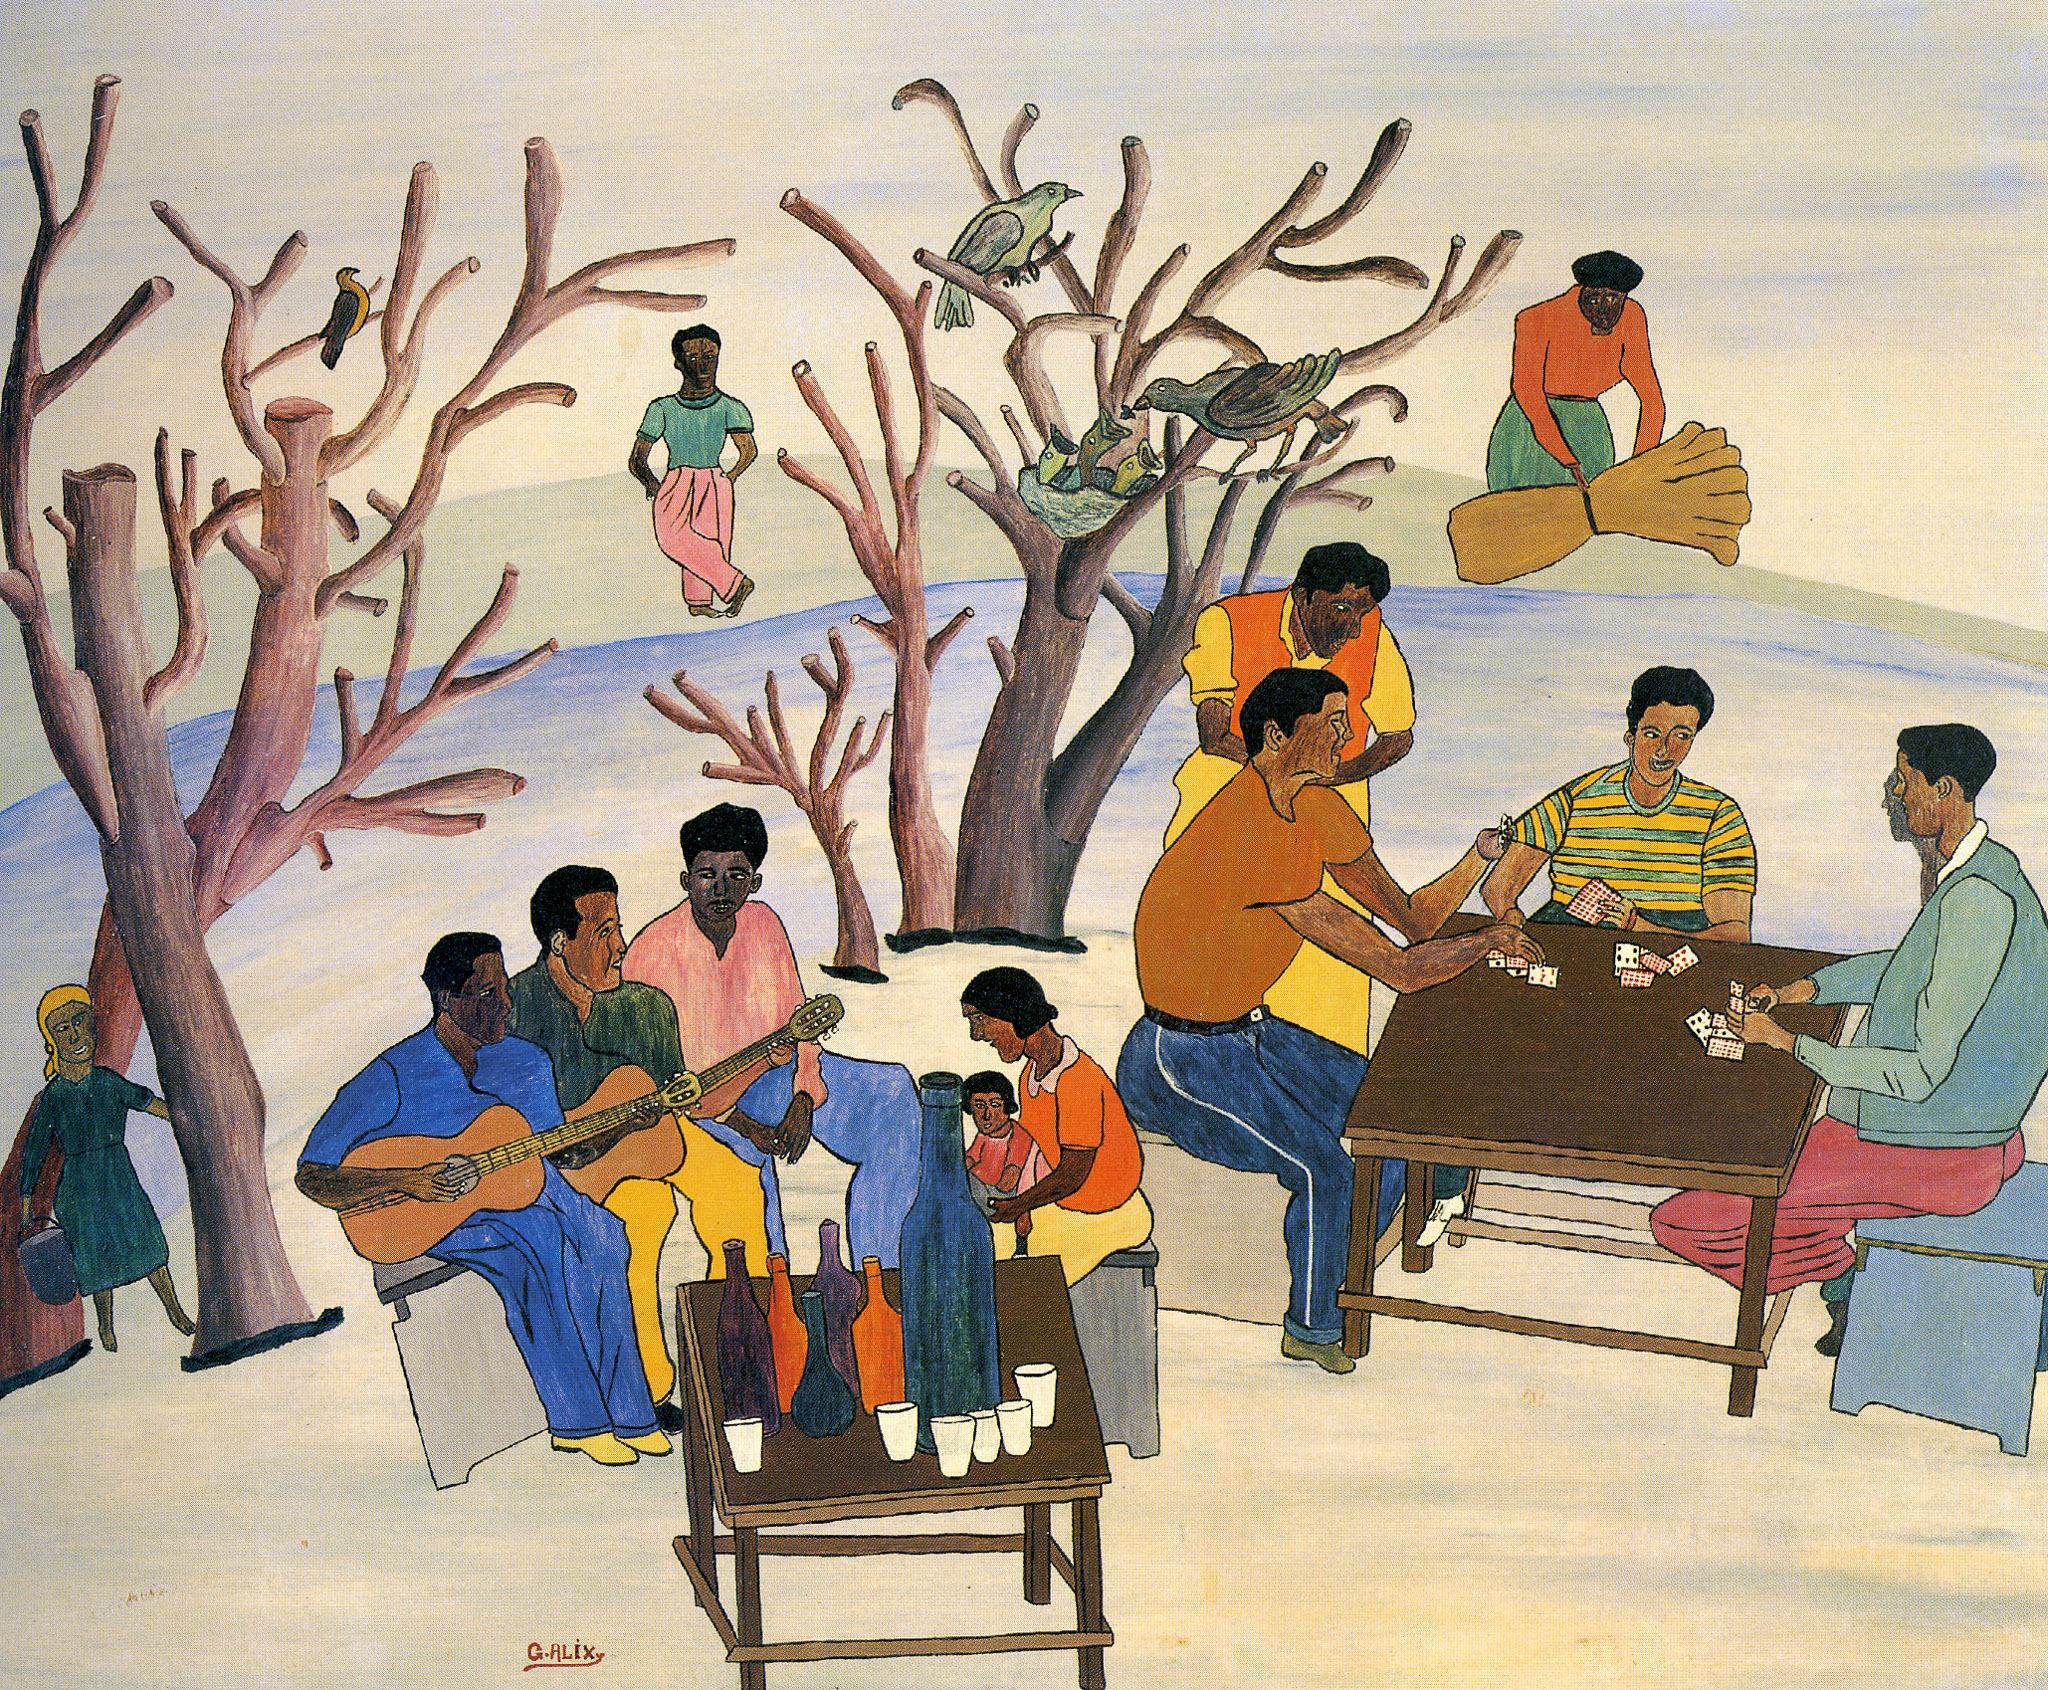 Gatherings Observed, 1965